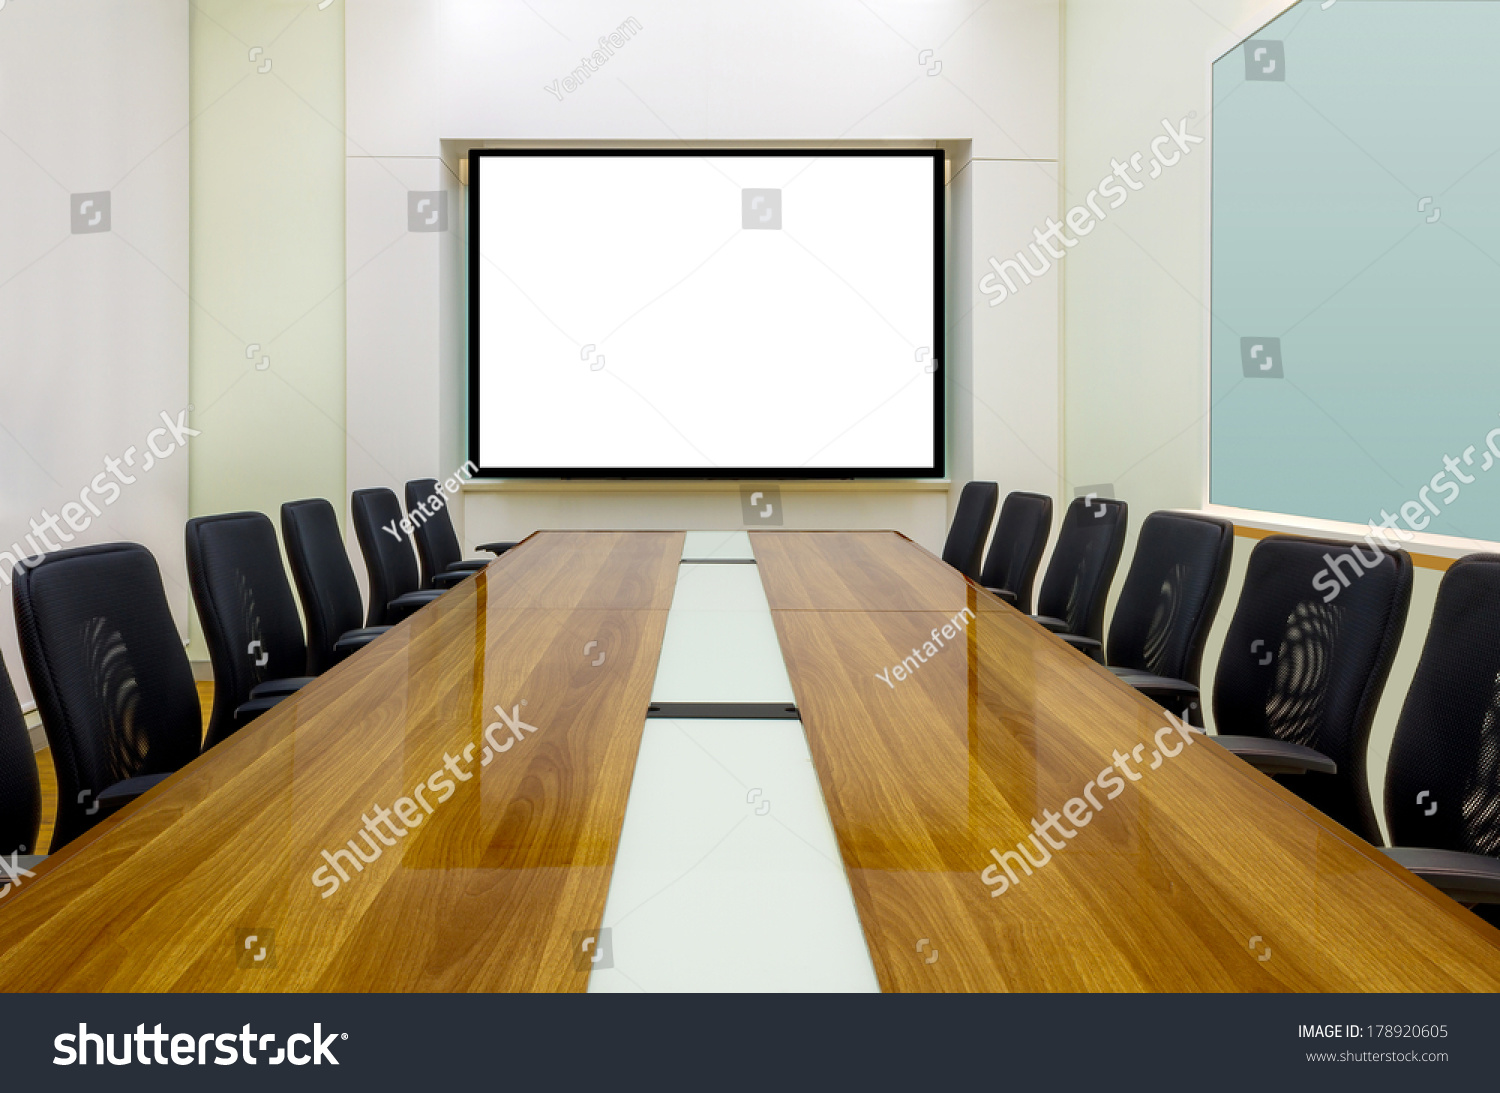 Interior Conference Room Meeting Room Boardroom Stock Photo